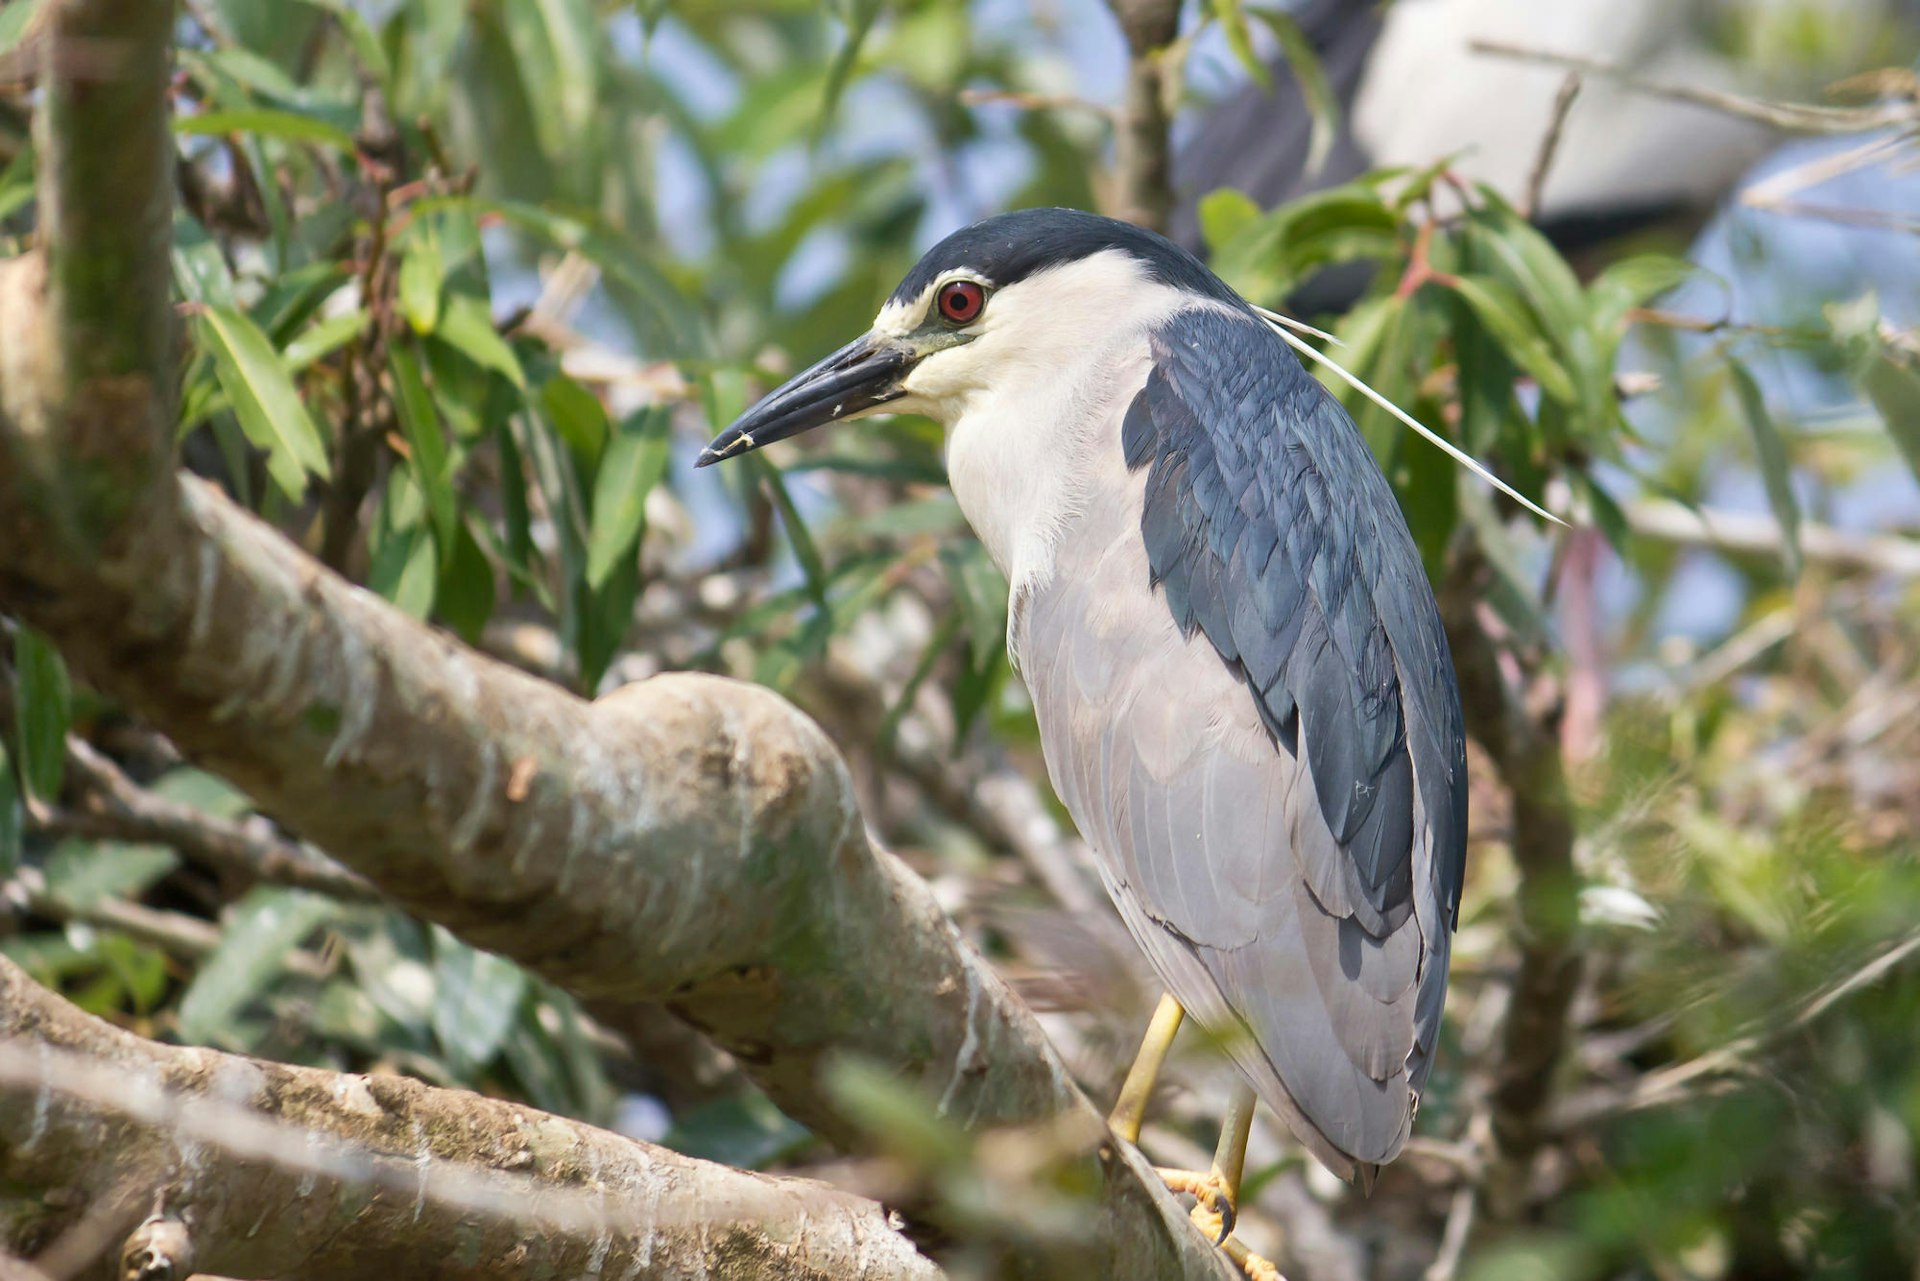 A night heron keeps watch from the banks of the Cauvery River © vbel71 / Getty Images